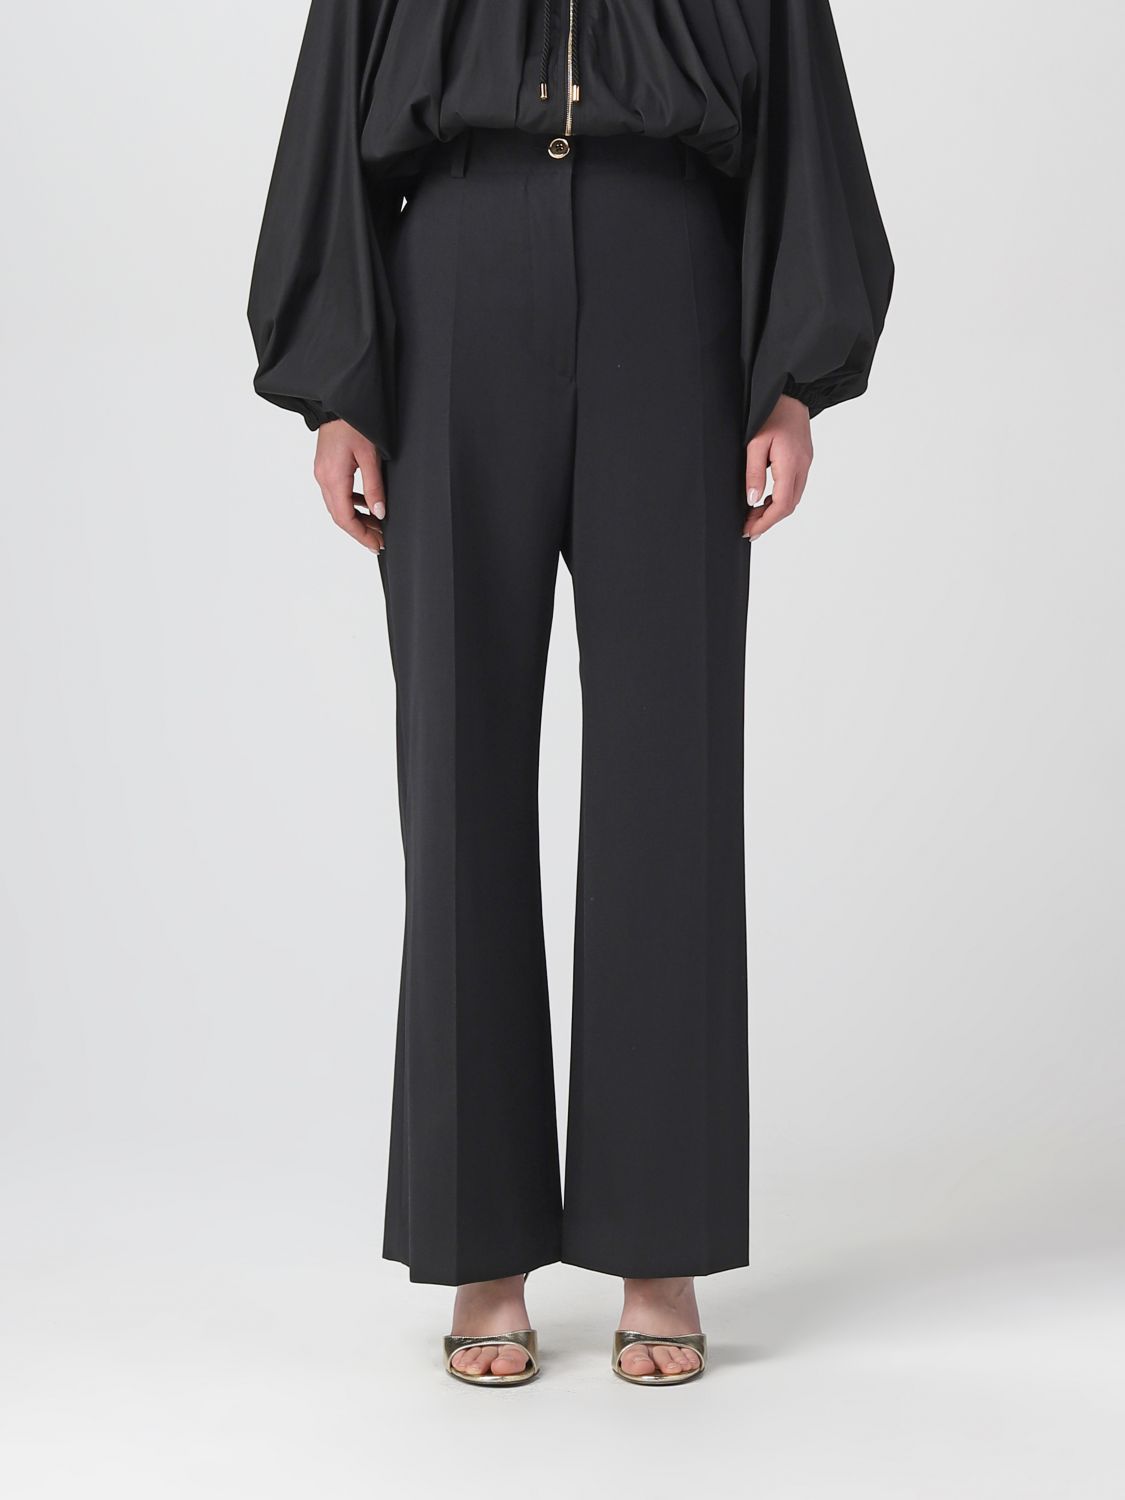 PATOU: pants for woman - Black | Patou pants TR0020103 online on GIGLIO.COM